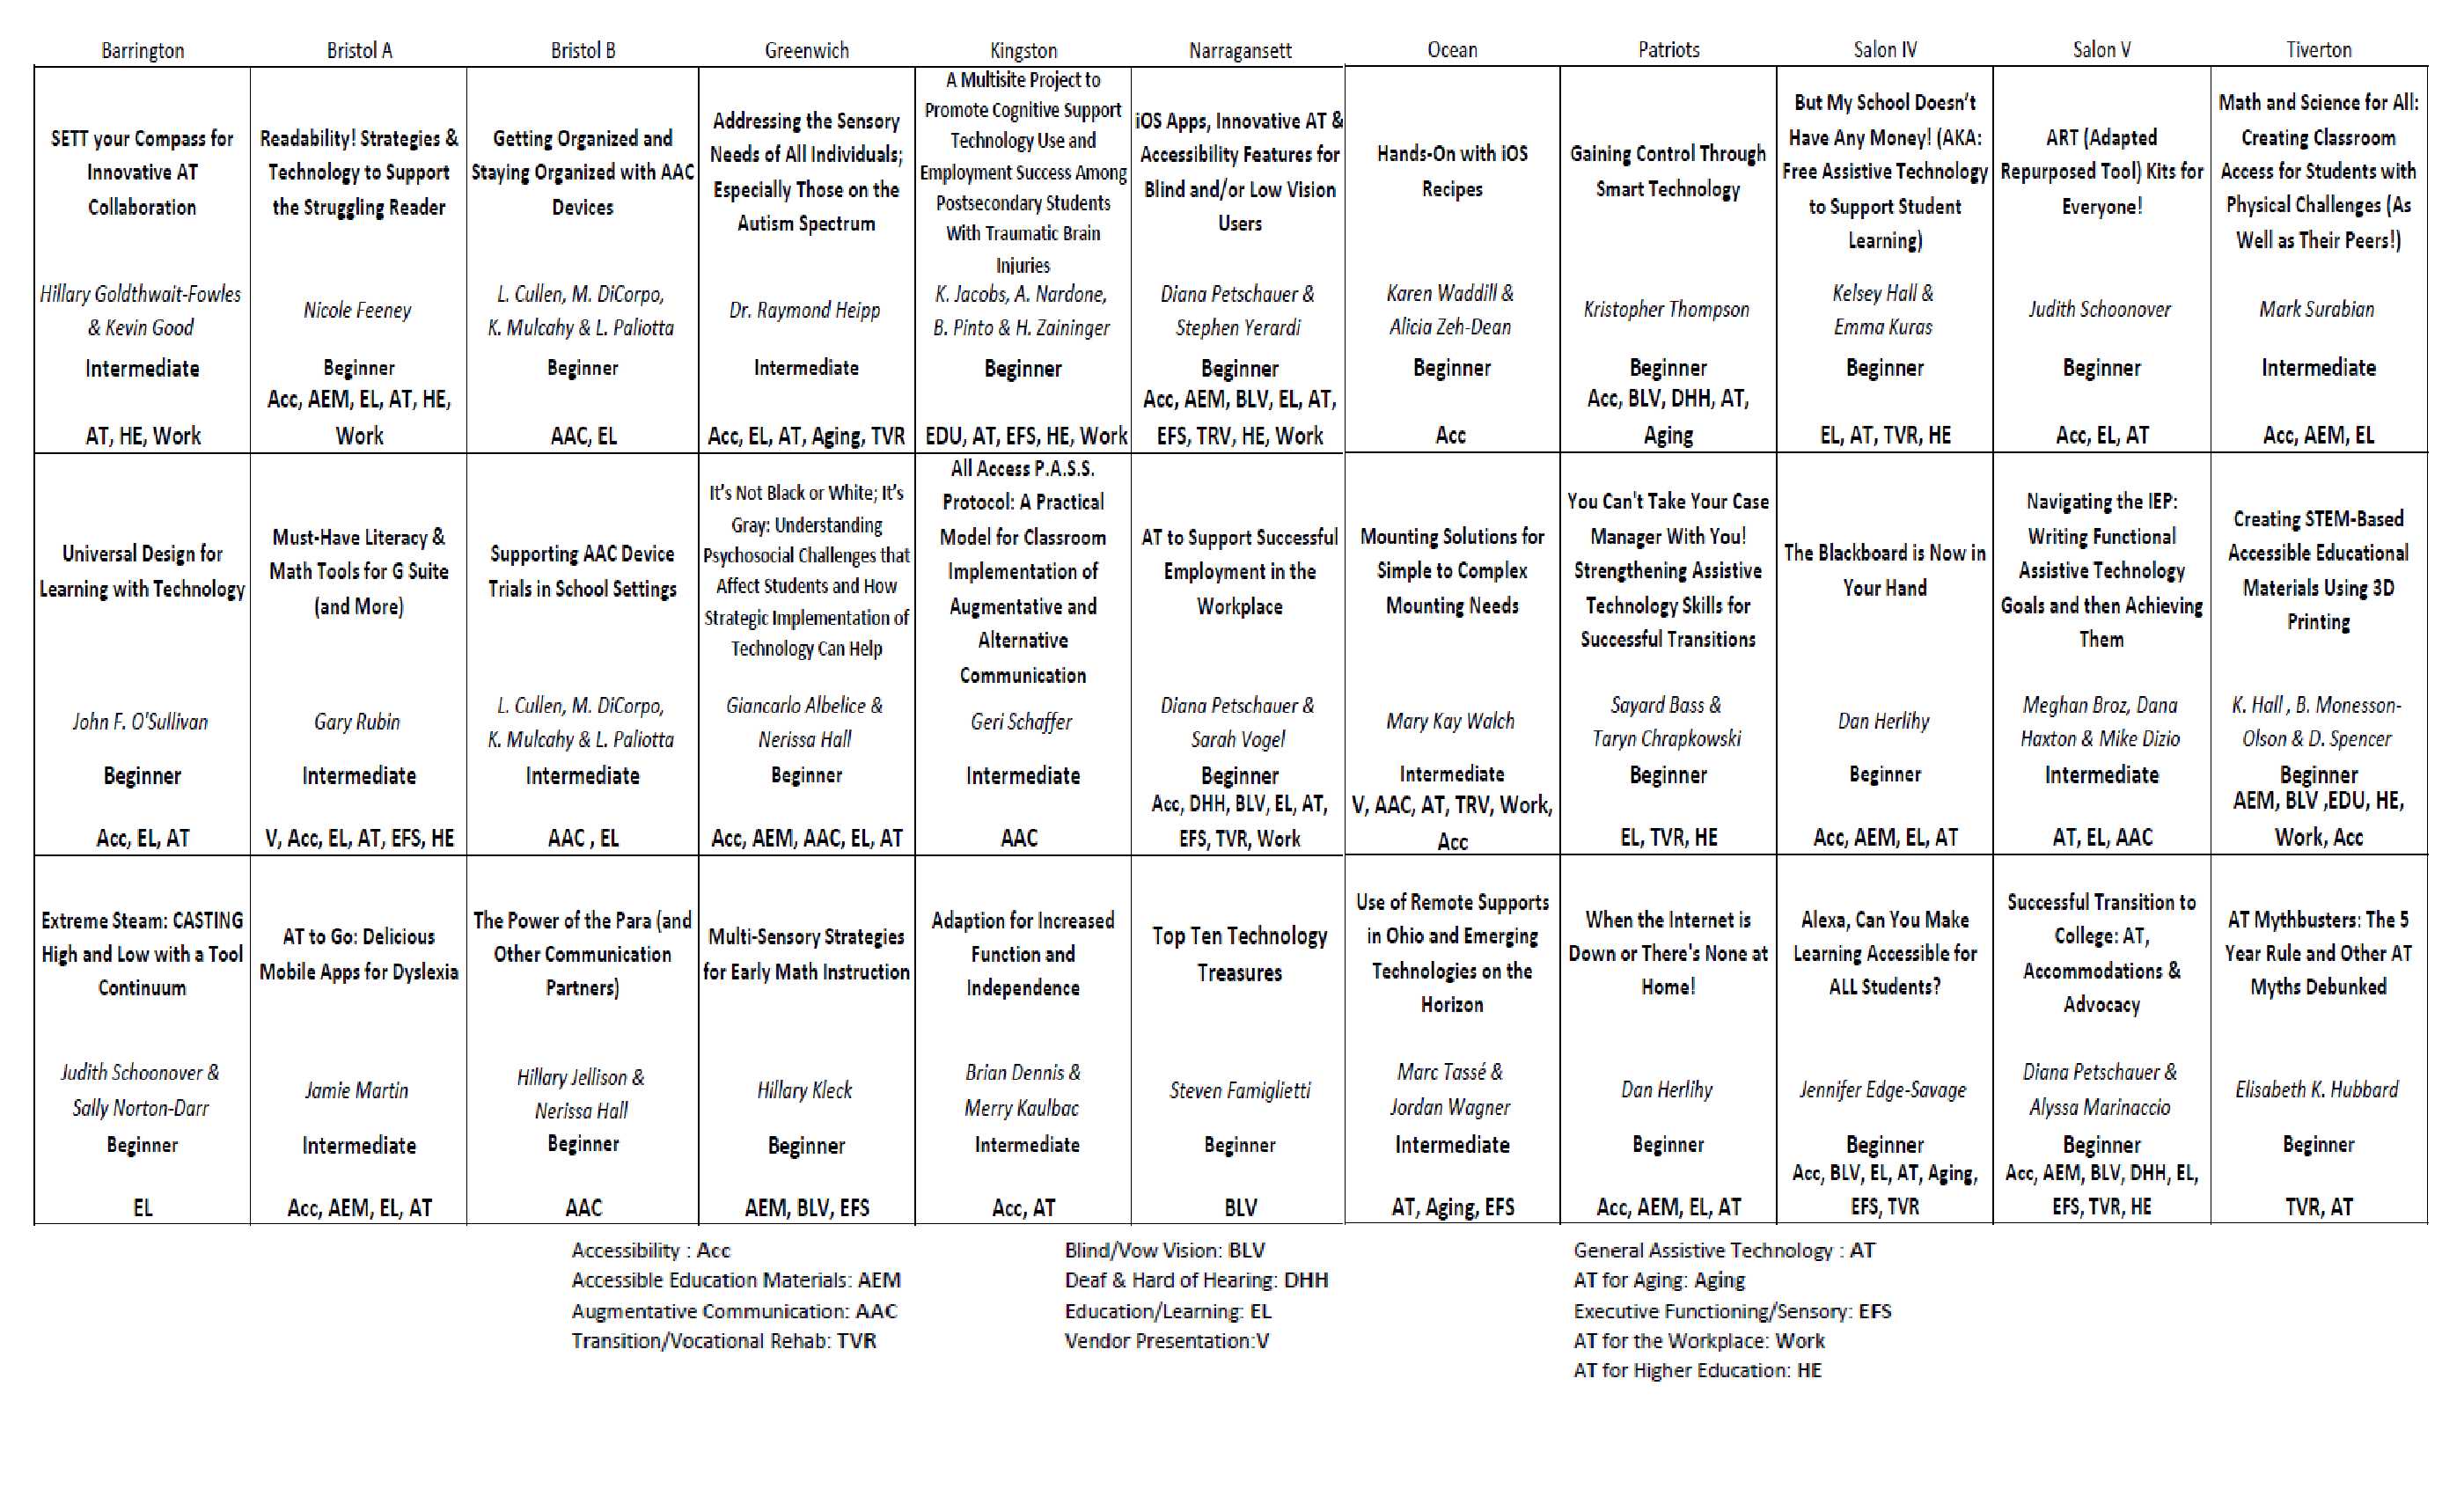 This is a grid of all sessions